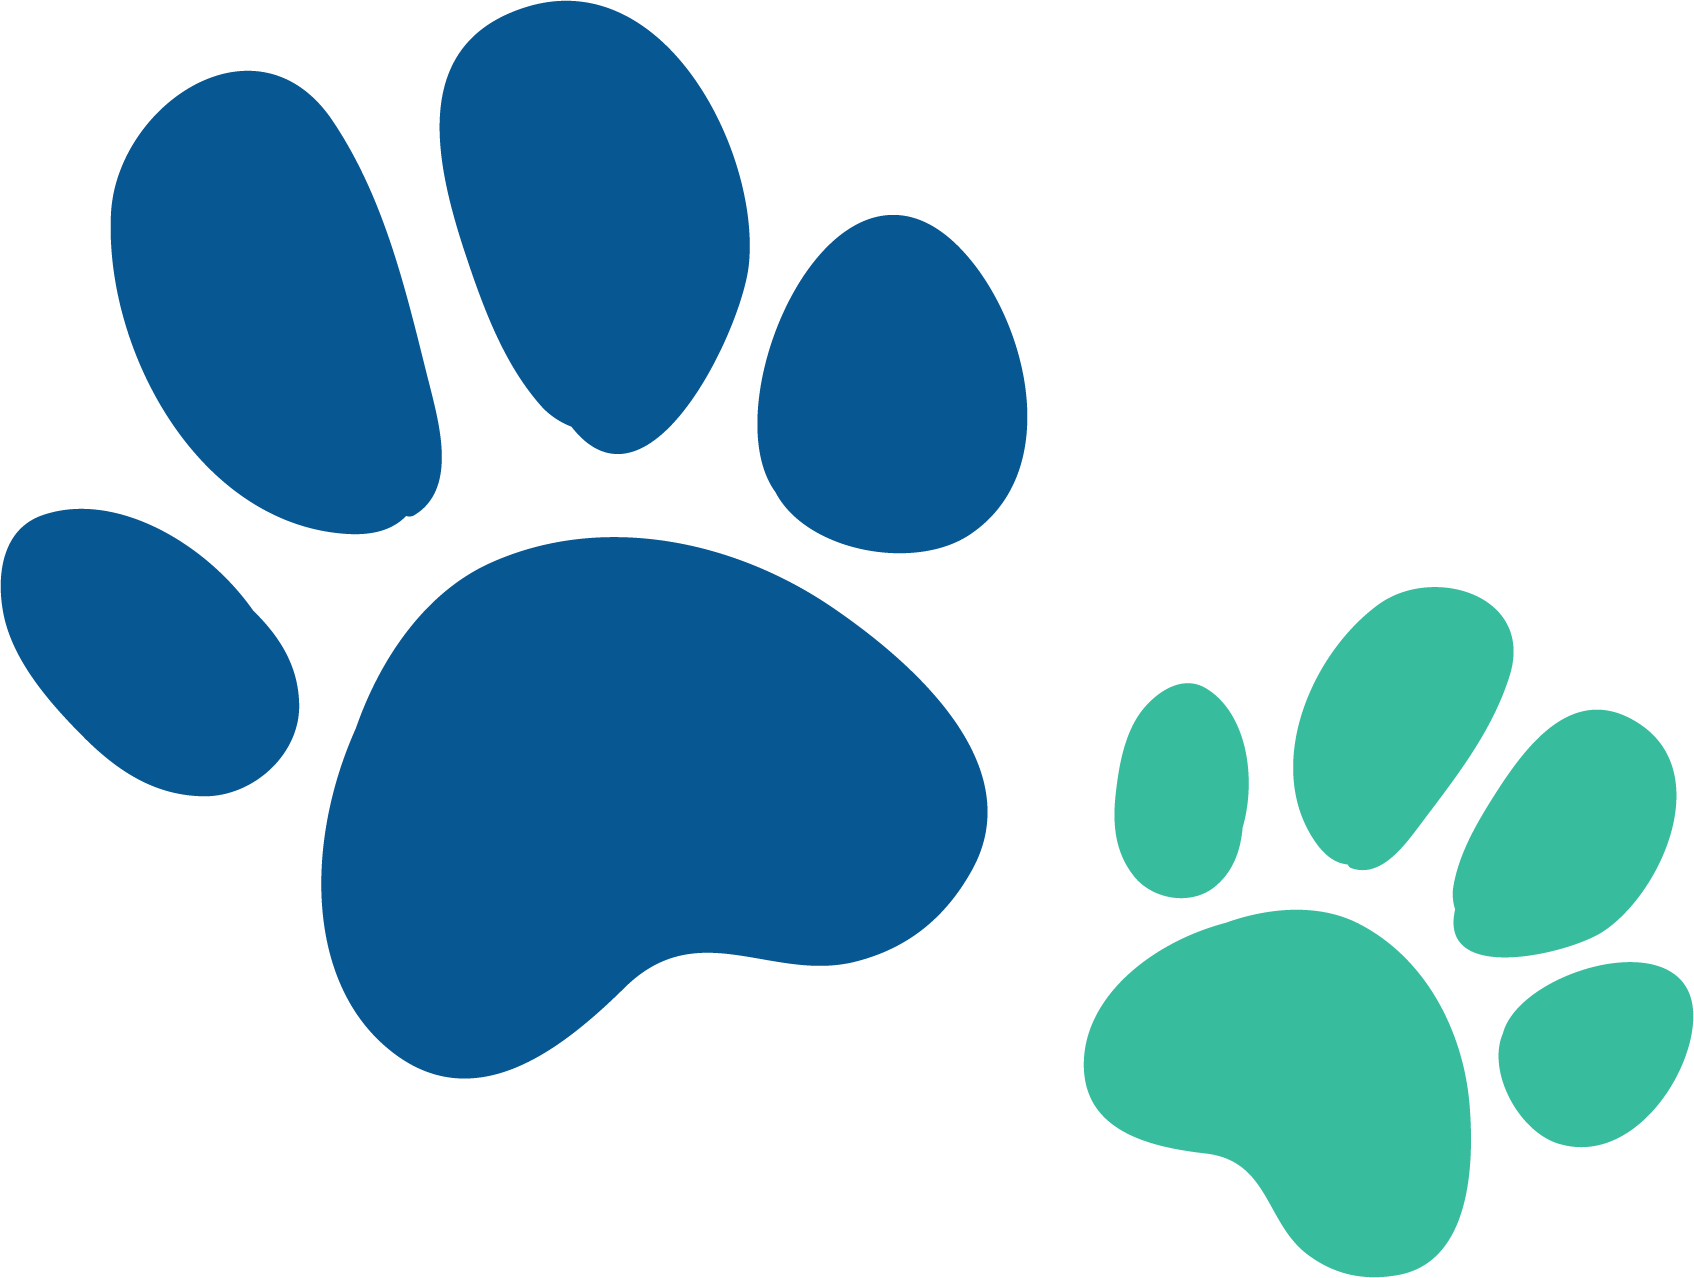 Two animated dog footprints. One is blue and the other is green.